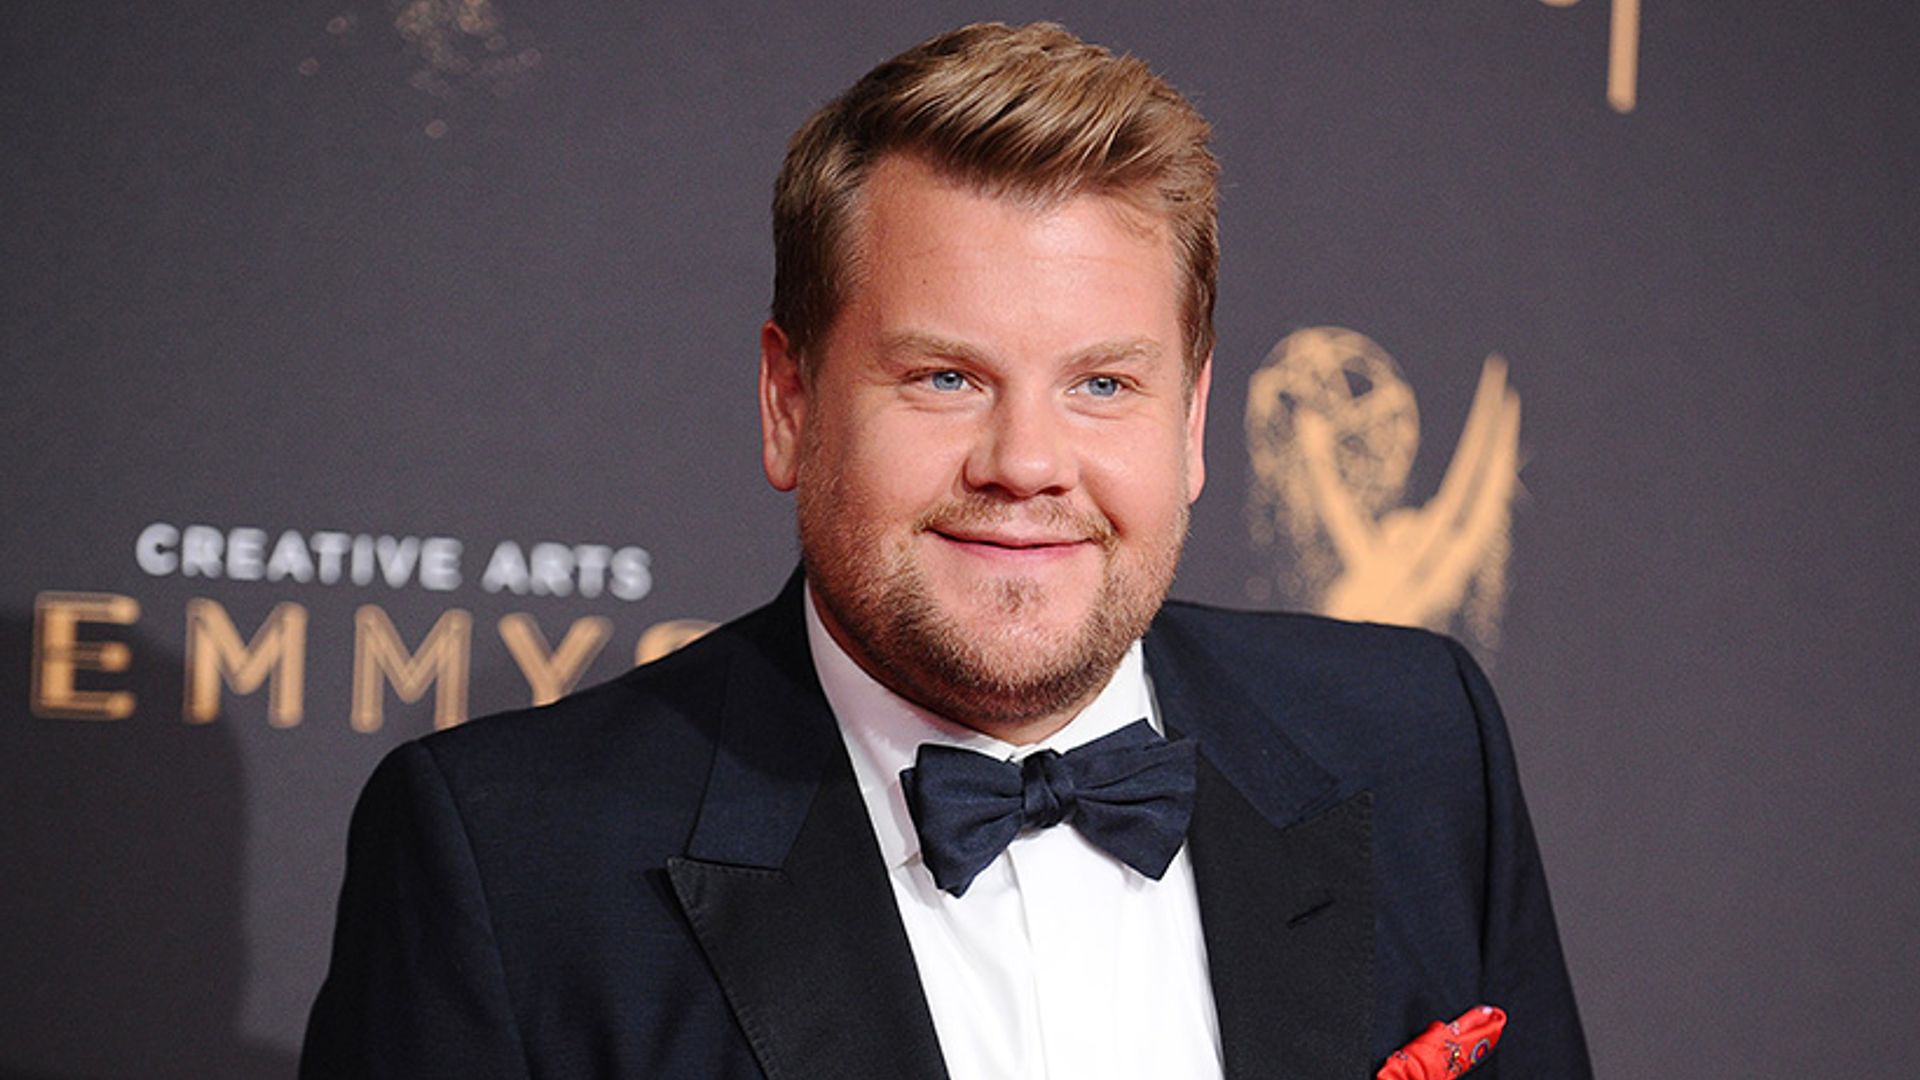 James Corden apologises after facing backlash for Harvey Weinstein jokes